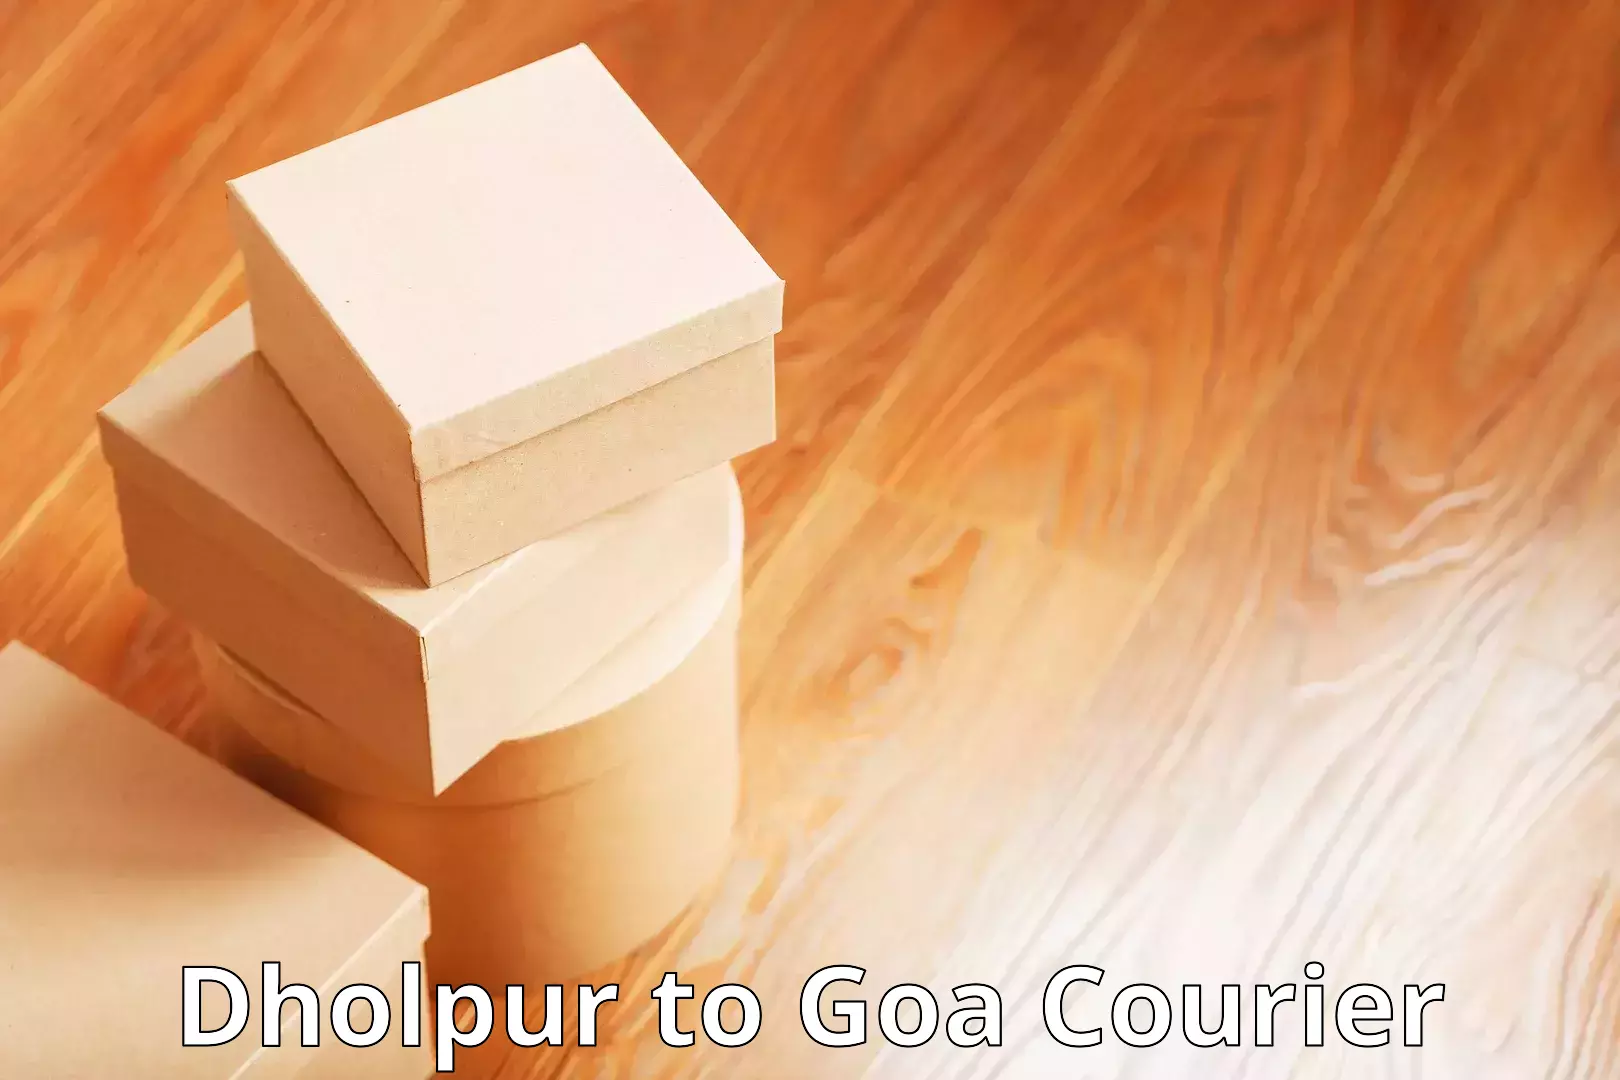 Seamless shipping experience Dholpur to IIT Goa